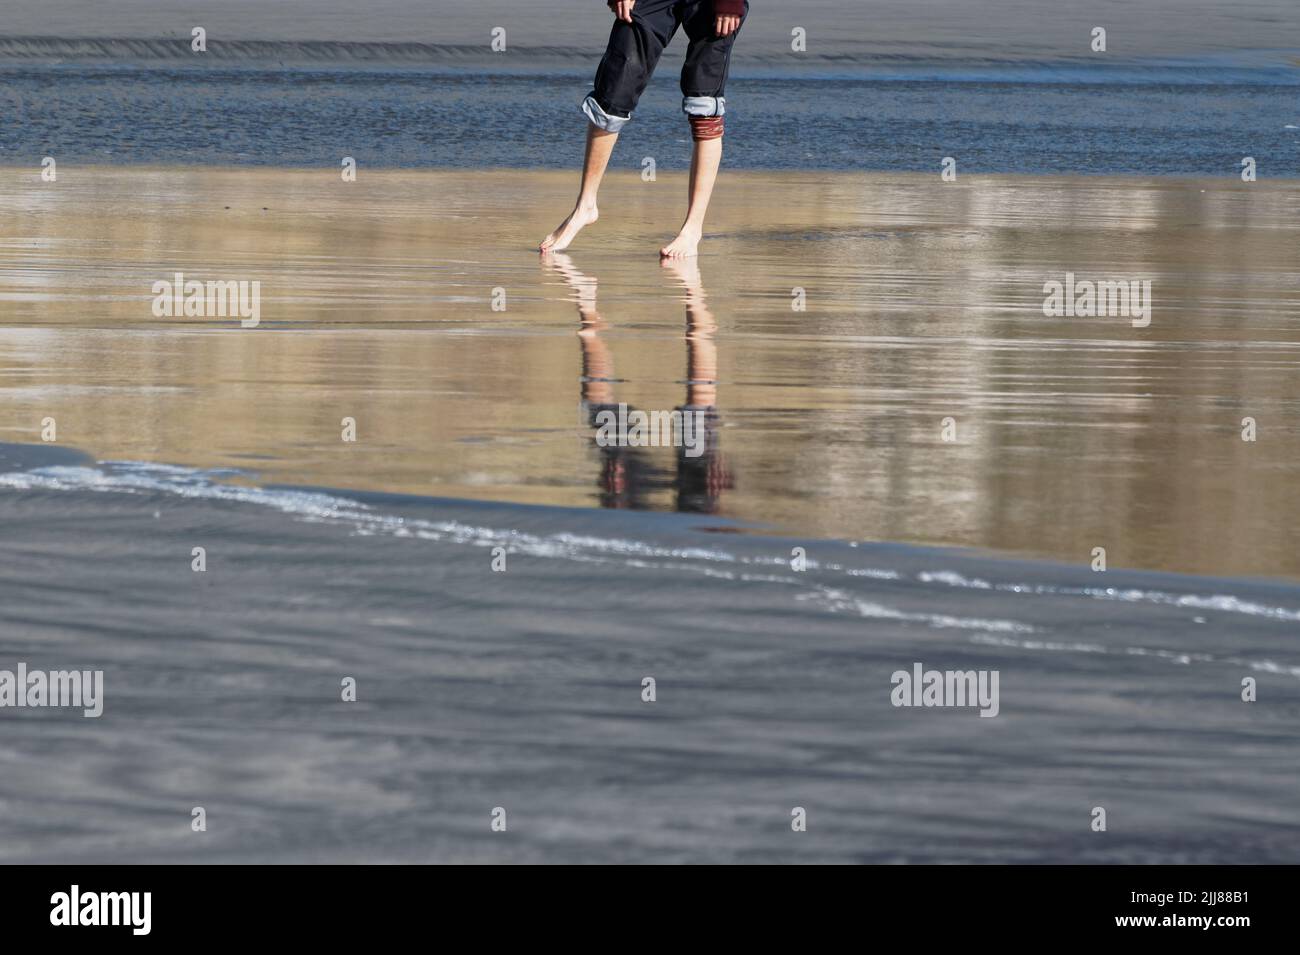 A summer's day invites rolled up jeans and getting your feet wet at the beach. Stock Photo